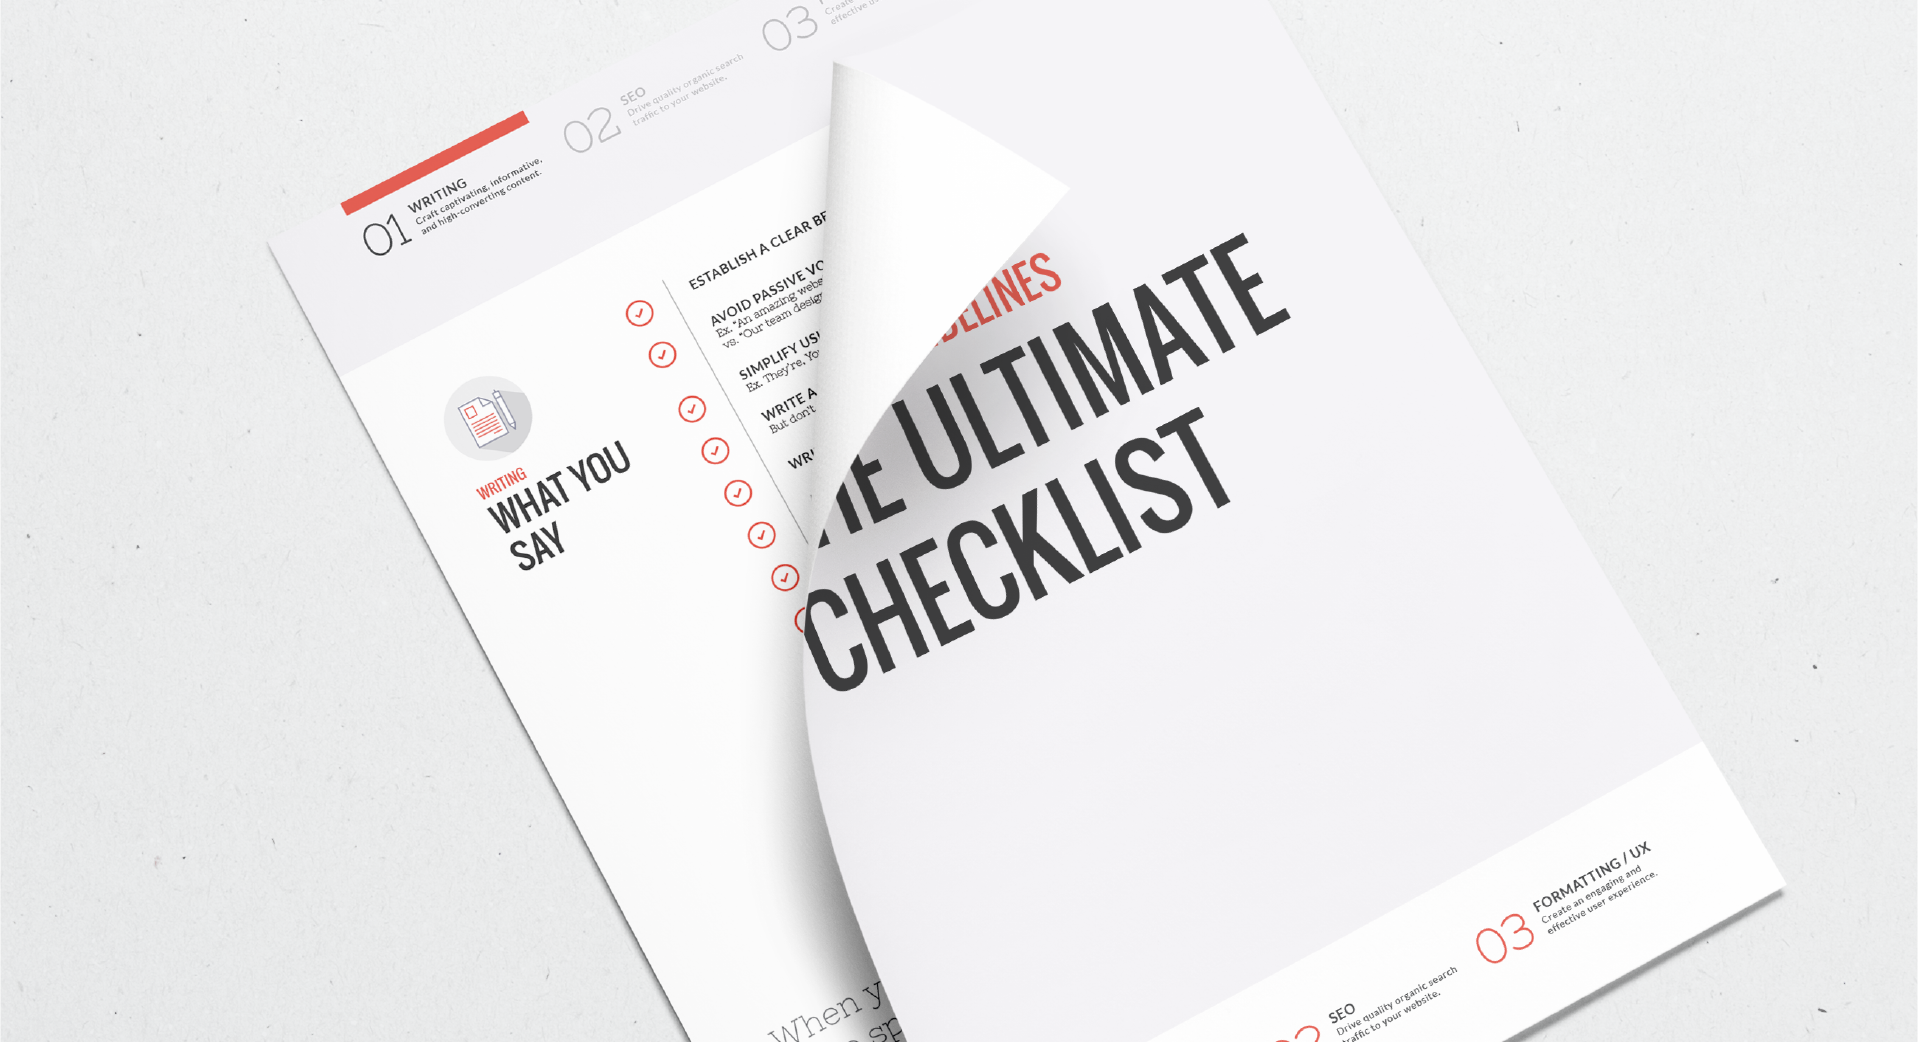 crafted-checklist-LP-img2-08.png